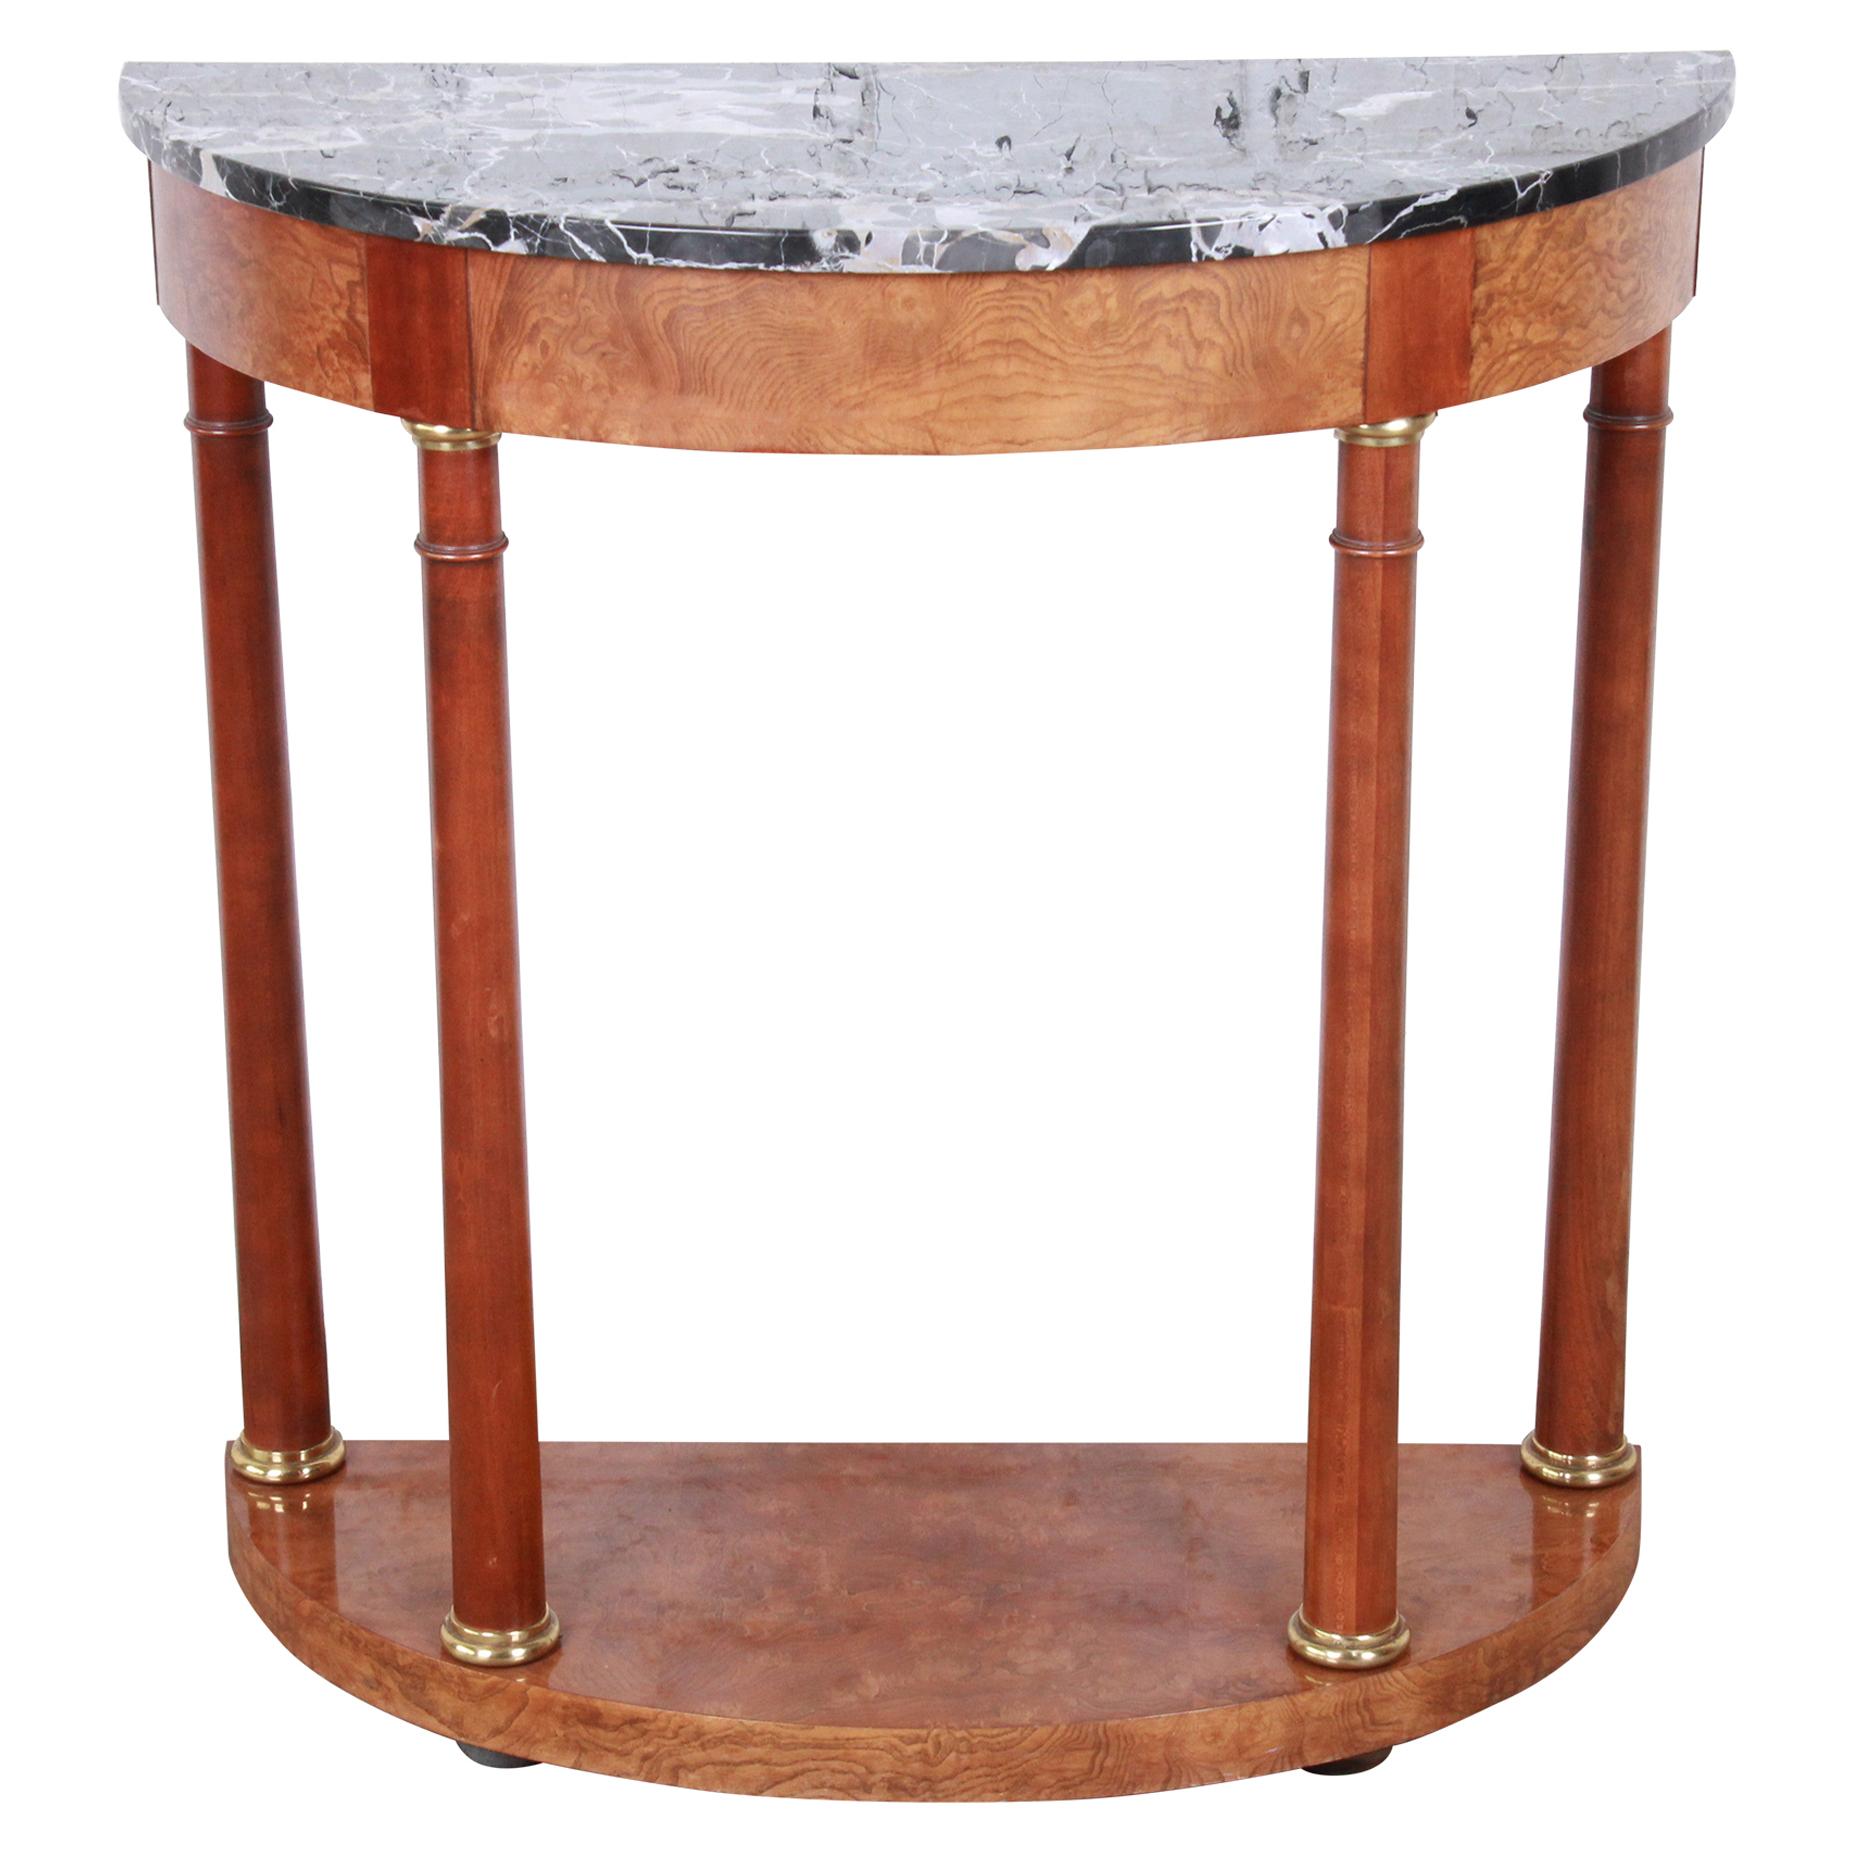 Baker Furniture Burl Wood and Italian Marble Neoclassical Demilune Console Table